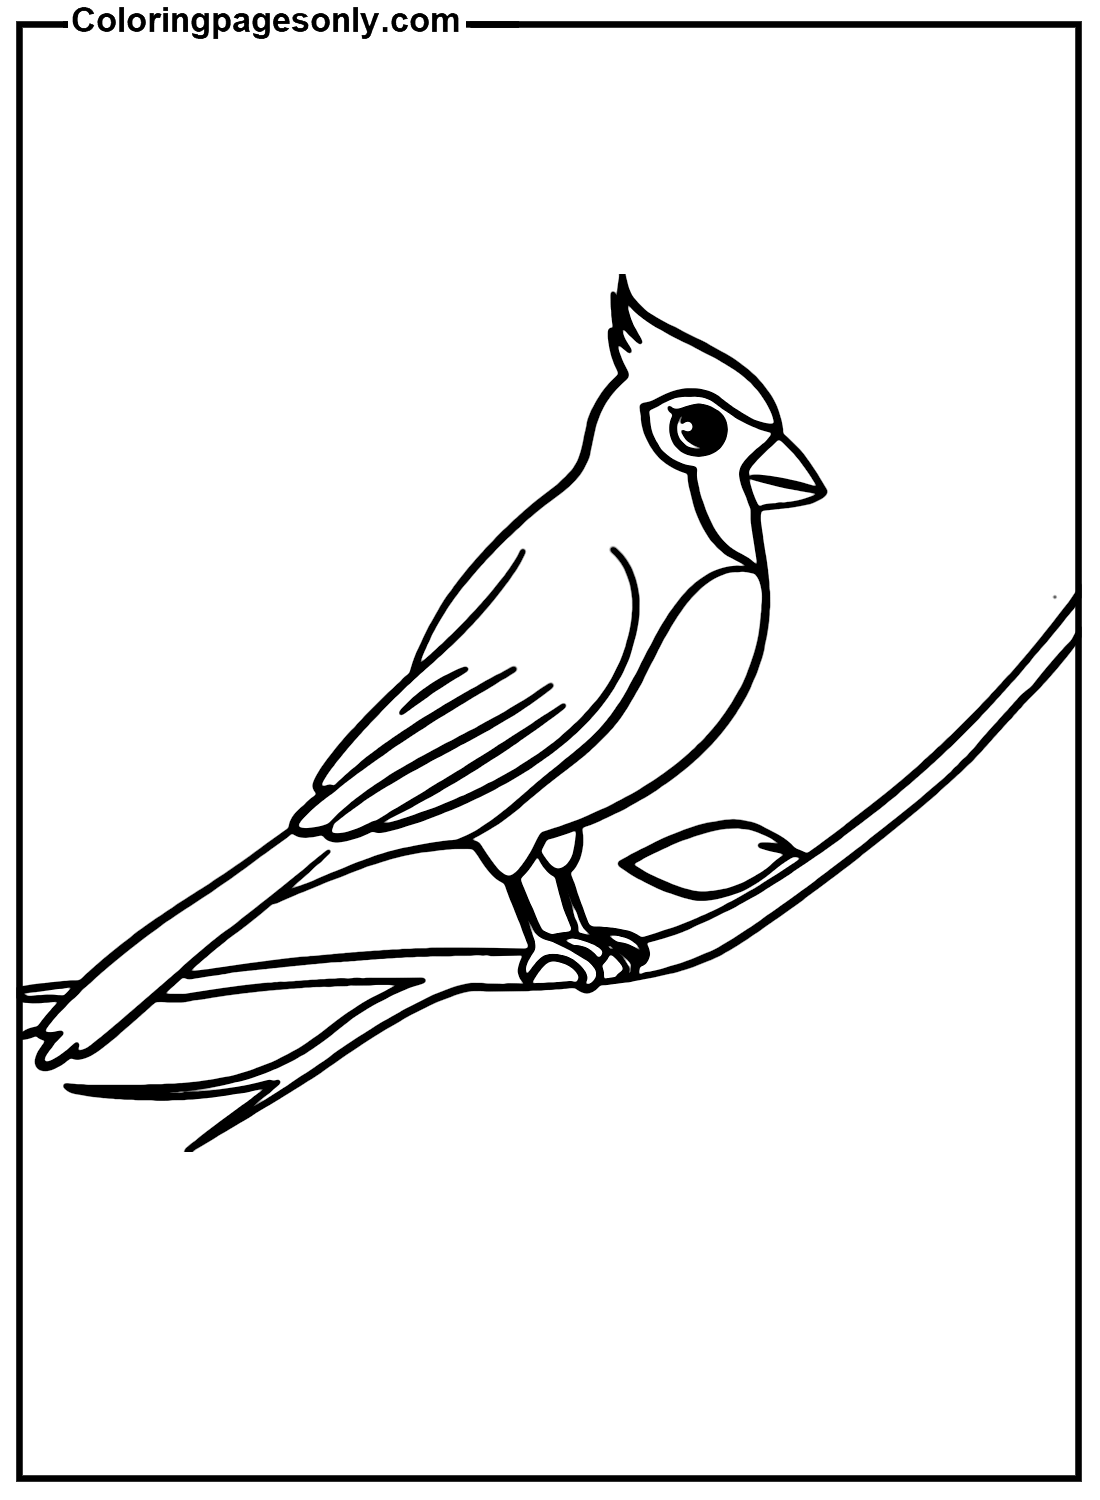 Cardinal Bird Coloring Pages - Get Coloring Pages